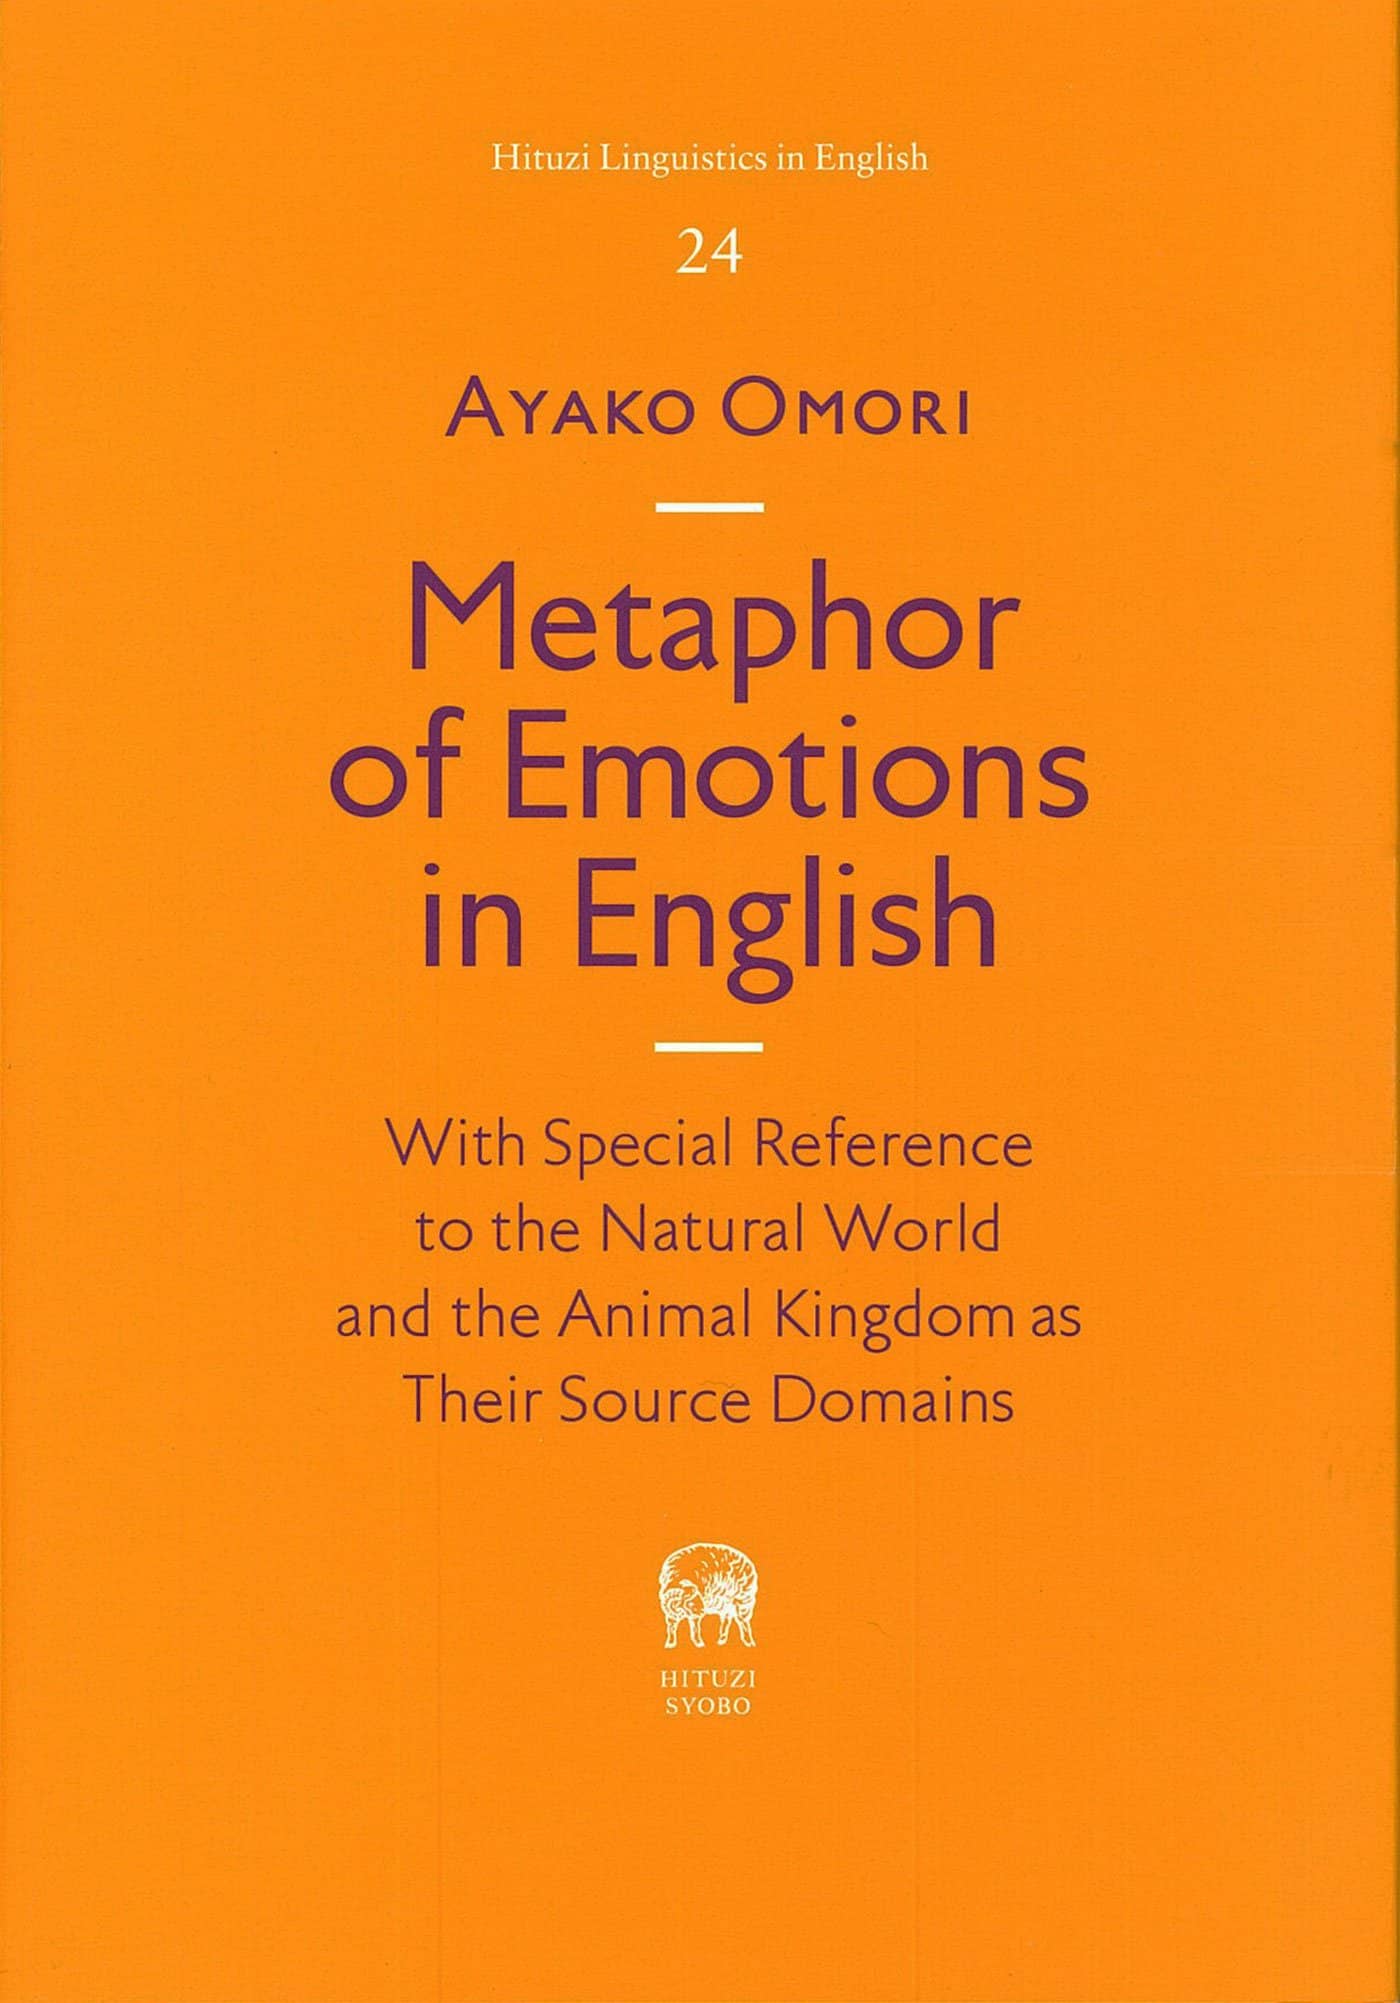 Metaphor of Emotions in English: With Special Reference to the Natural World and the Animal Kingdom as Their Source Domains